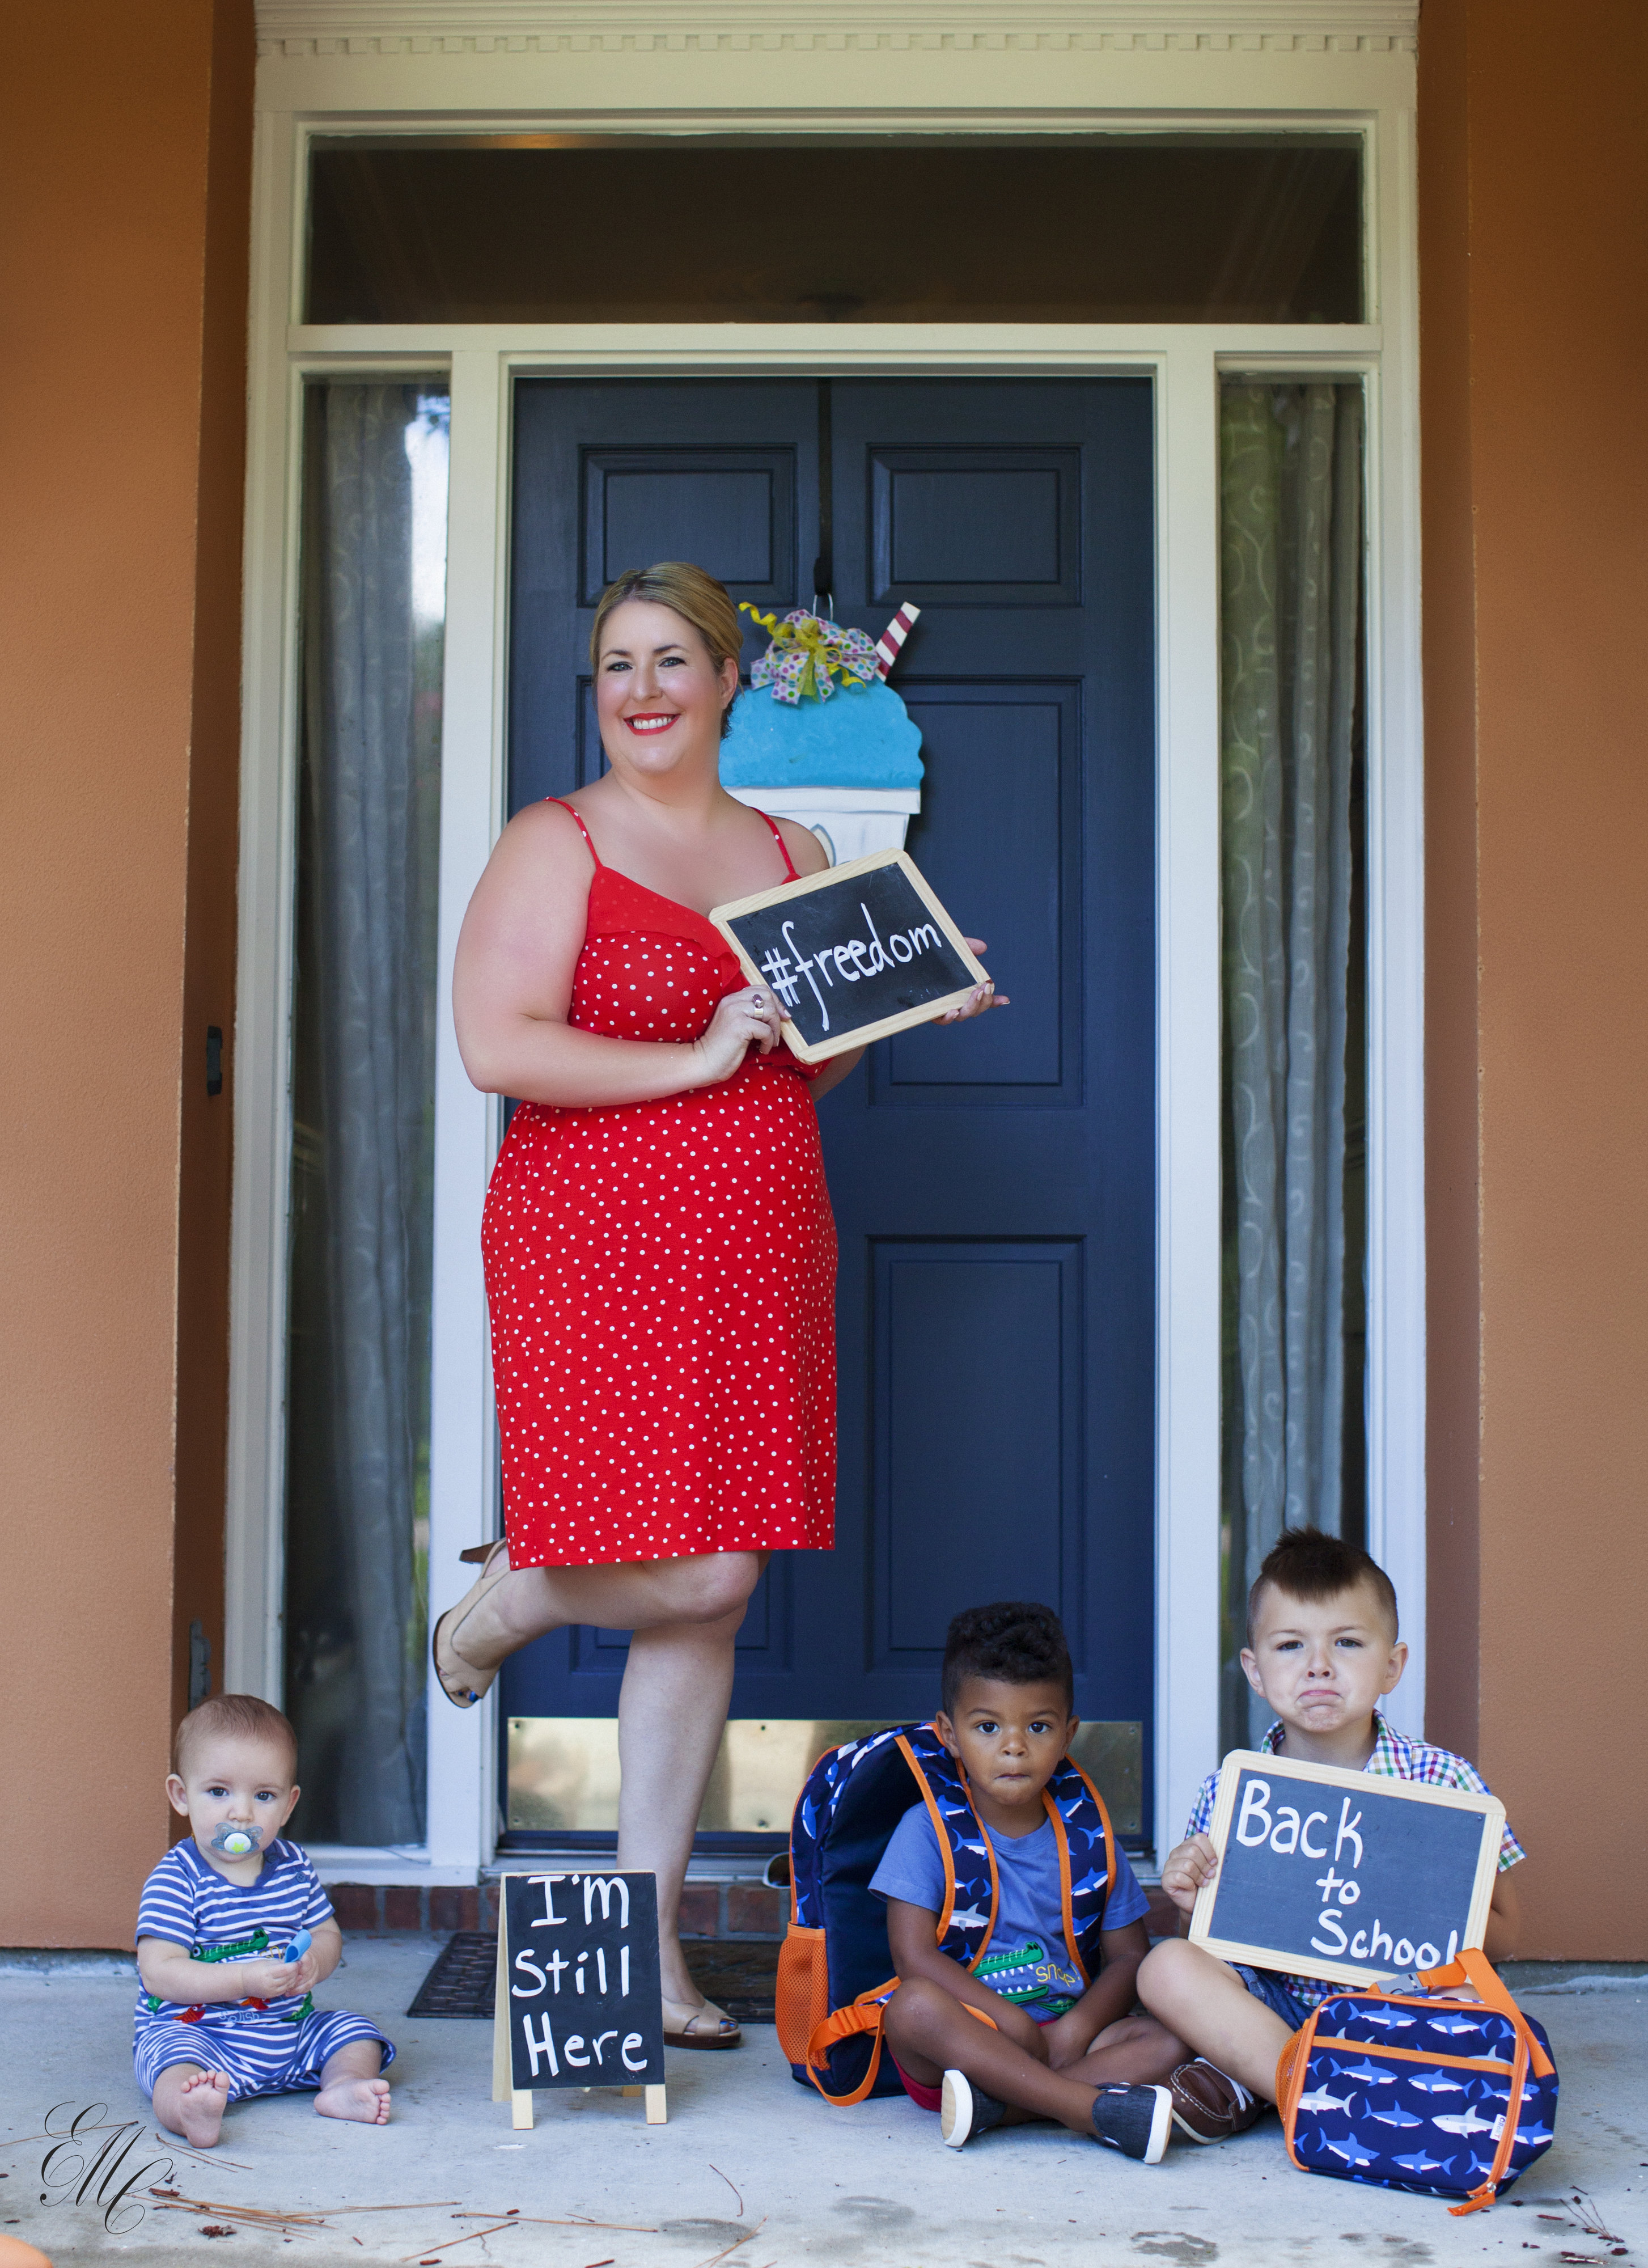 View More: http://erincefaluphotography.pass.us/backtoschool